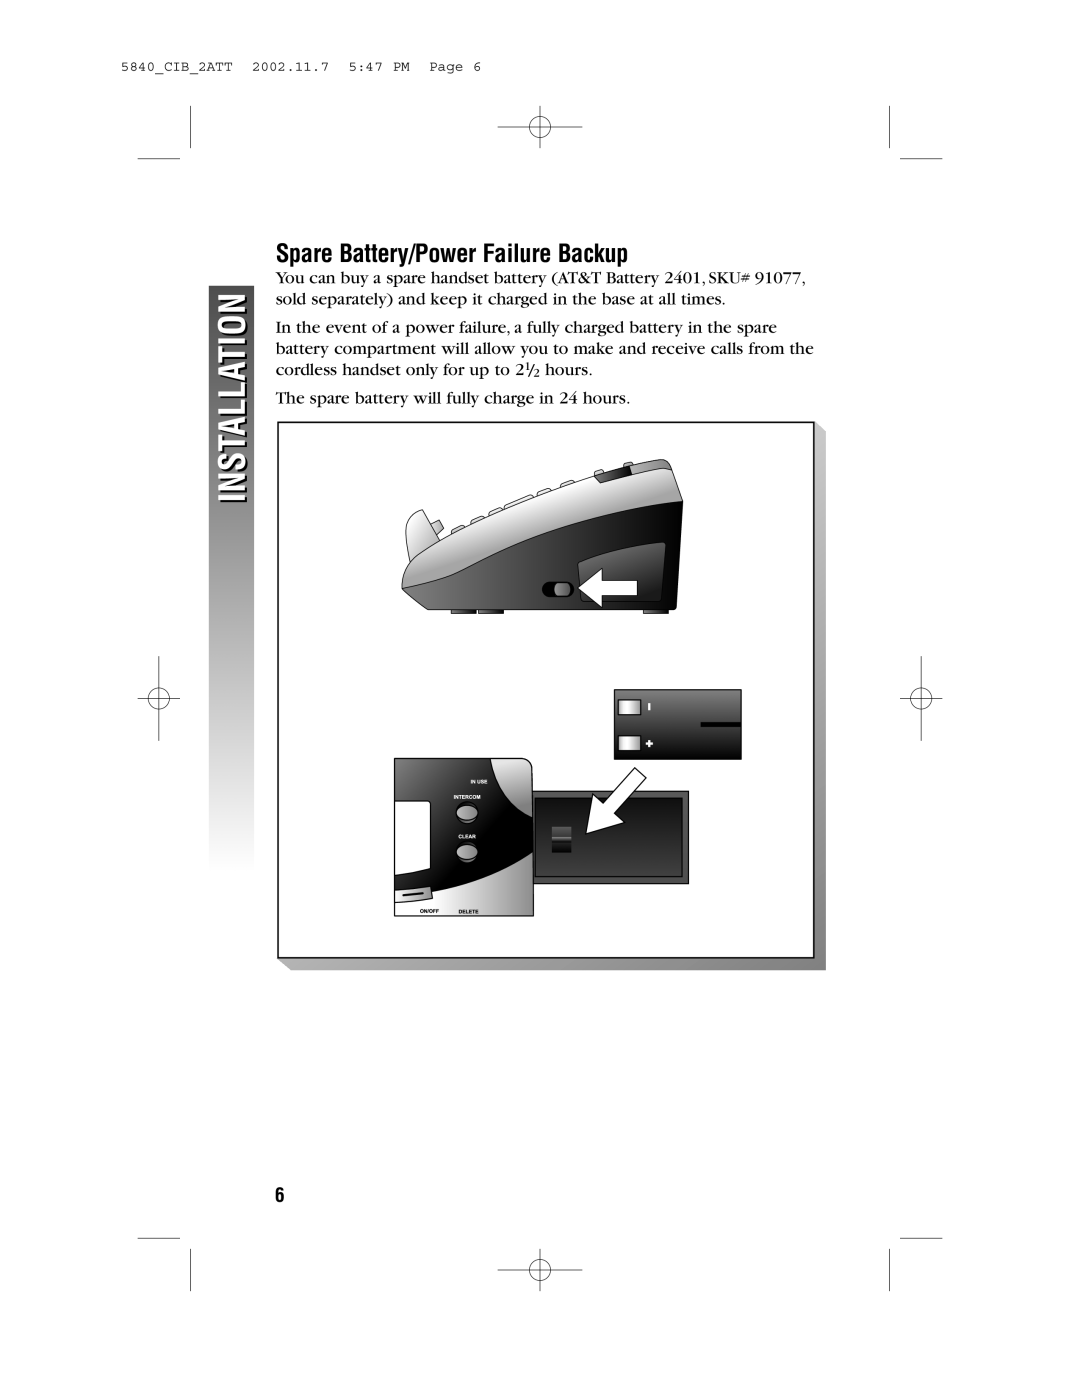 AT&T 5840 user manual Spare Battery/Power Failure Backup, Installation 